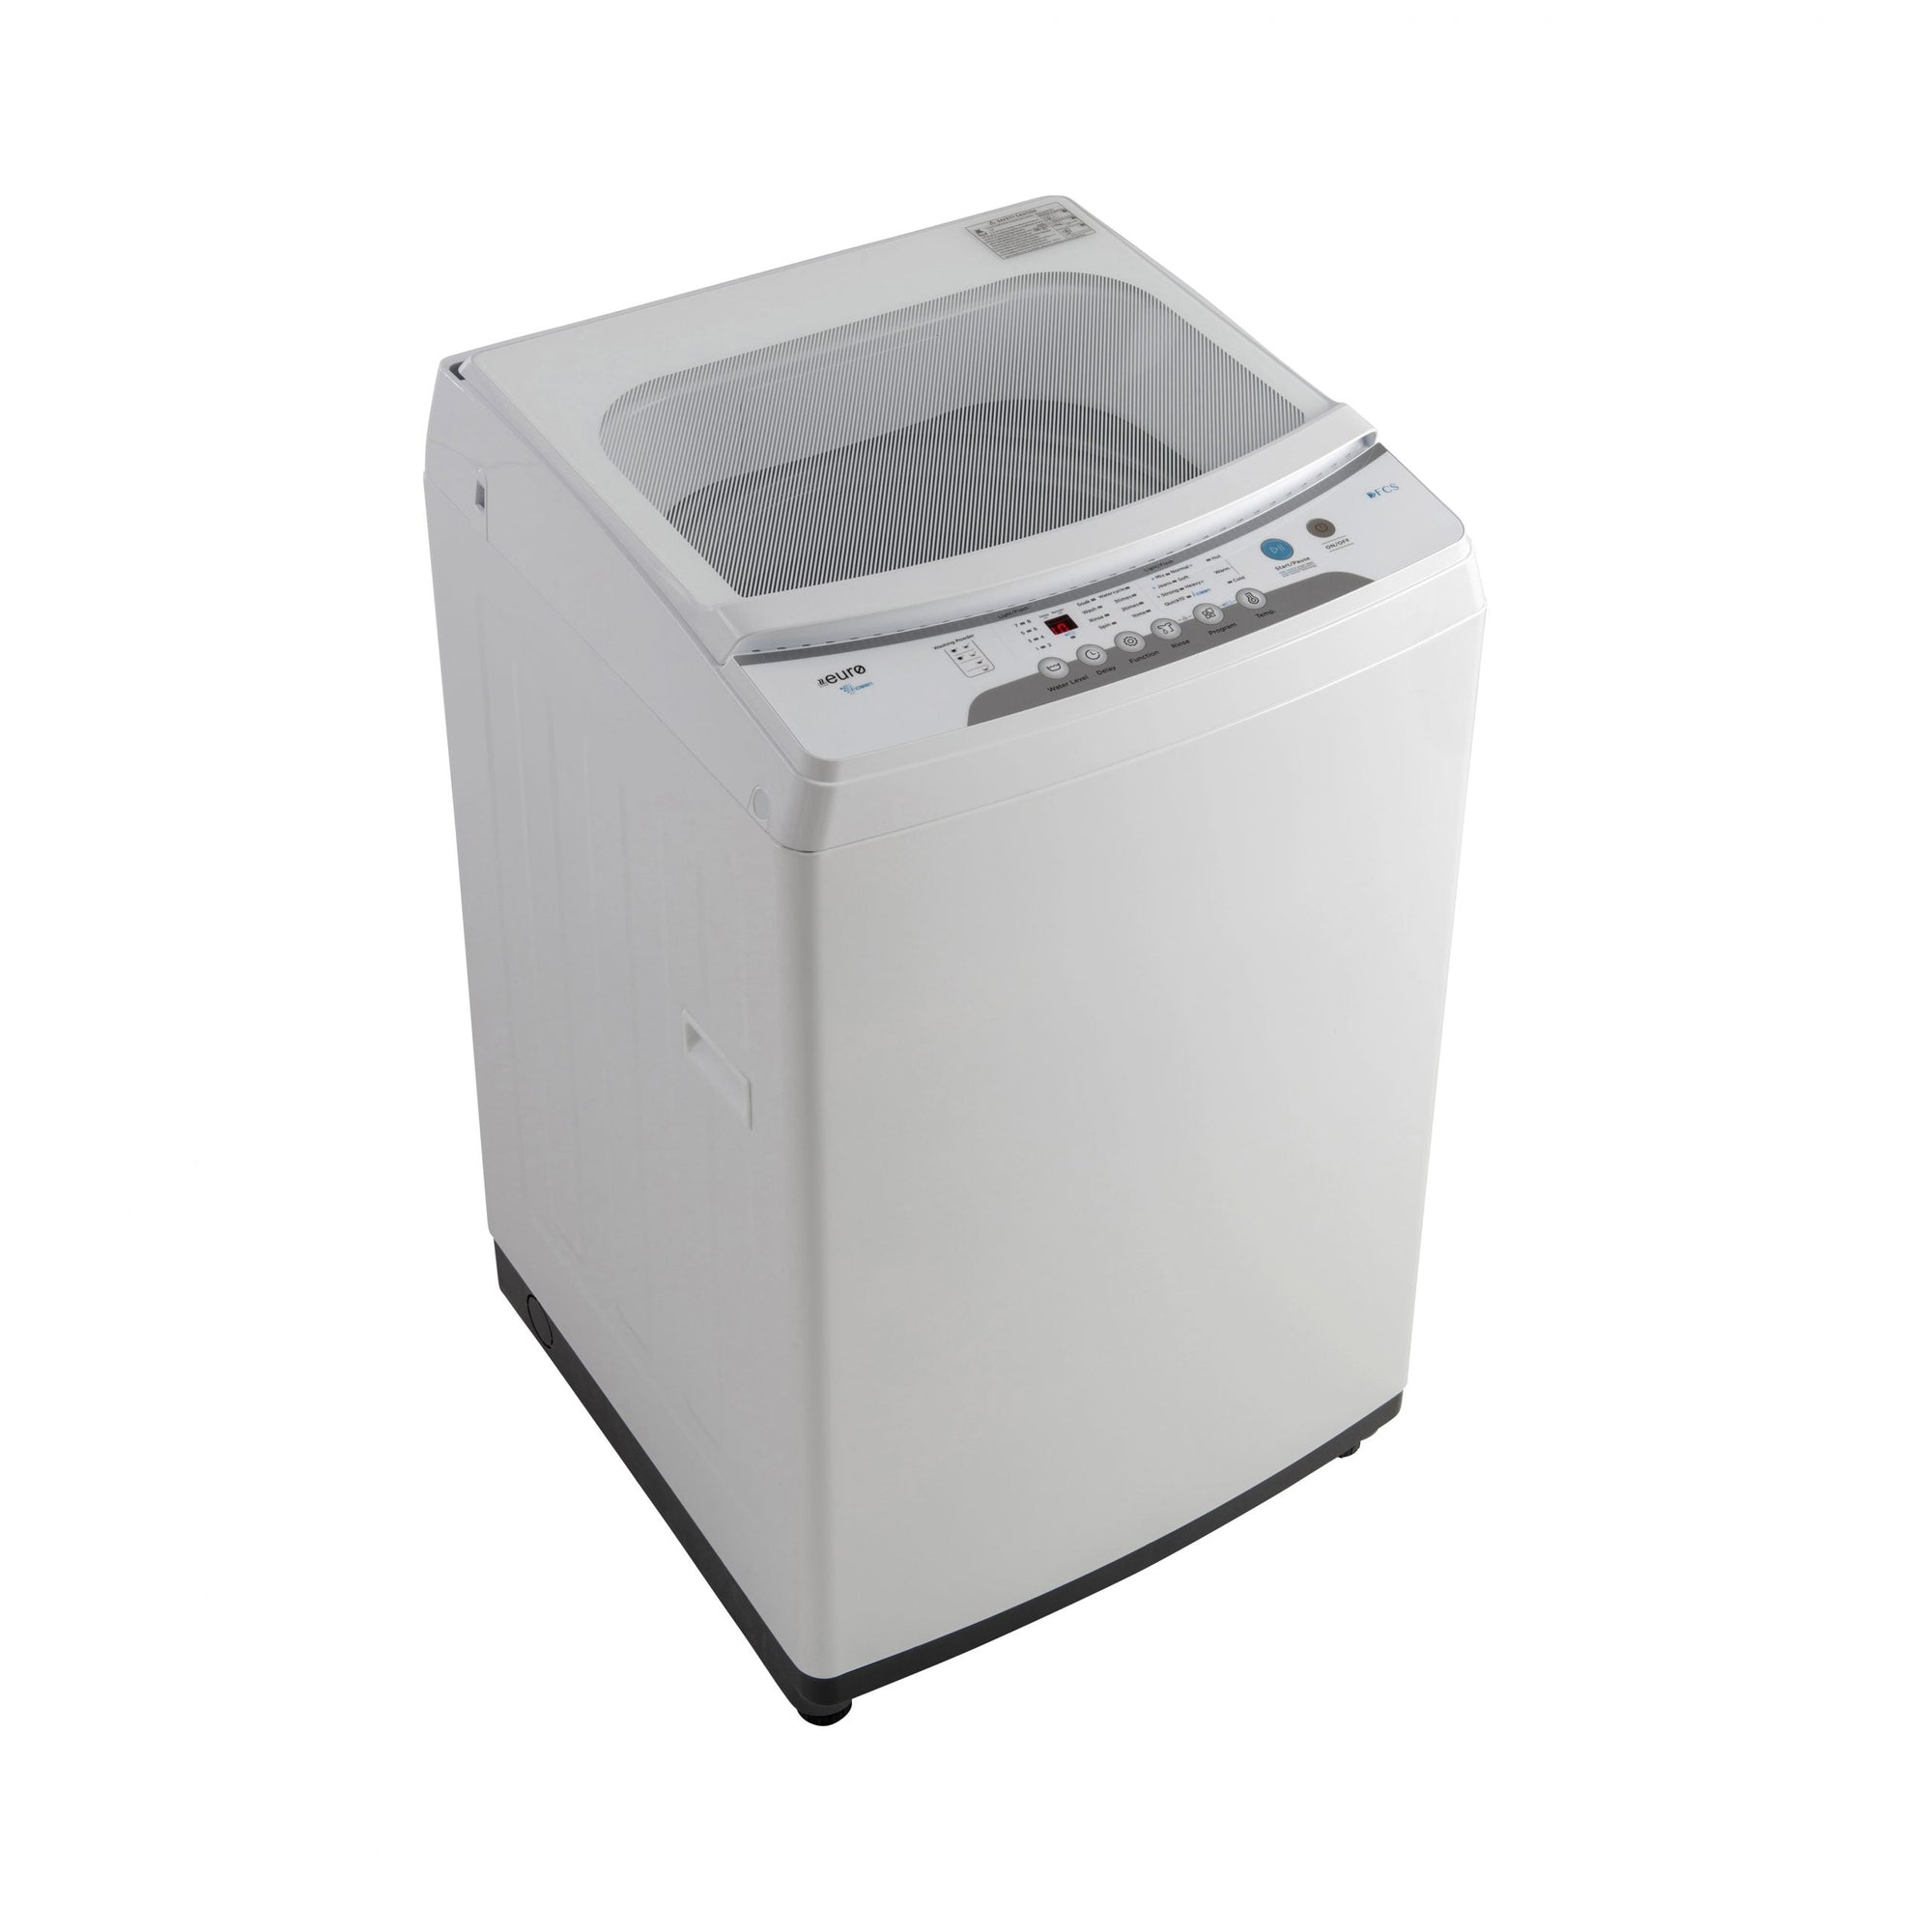 ETL10KWH- 10KG – Top Load Washer